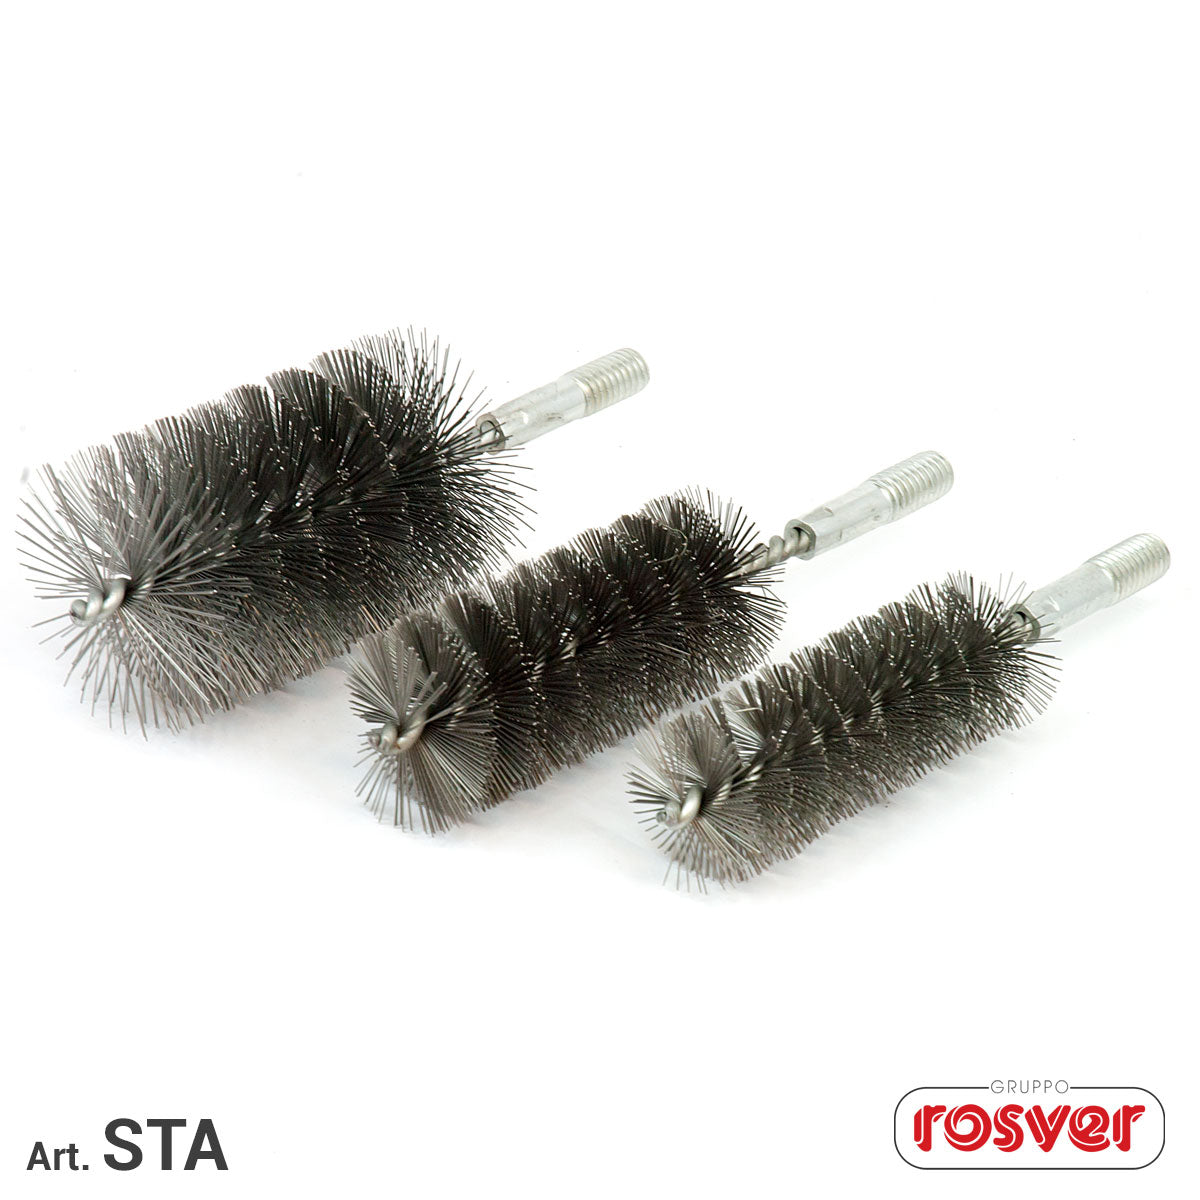 Steel Brushes with Thread Rosver - STA D.8xM6 - Conf.10pz